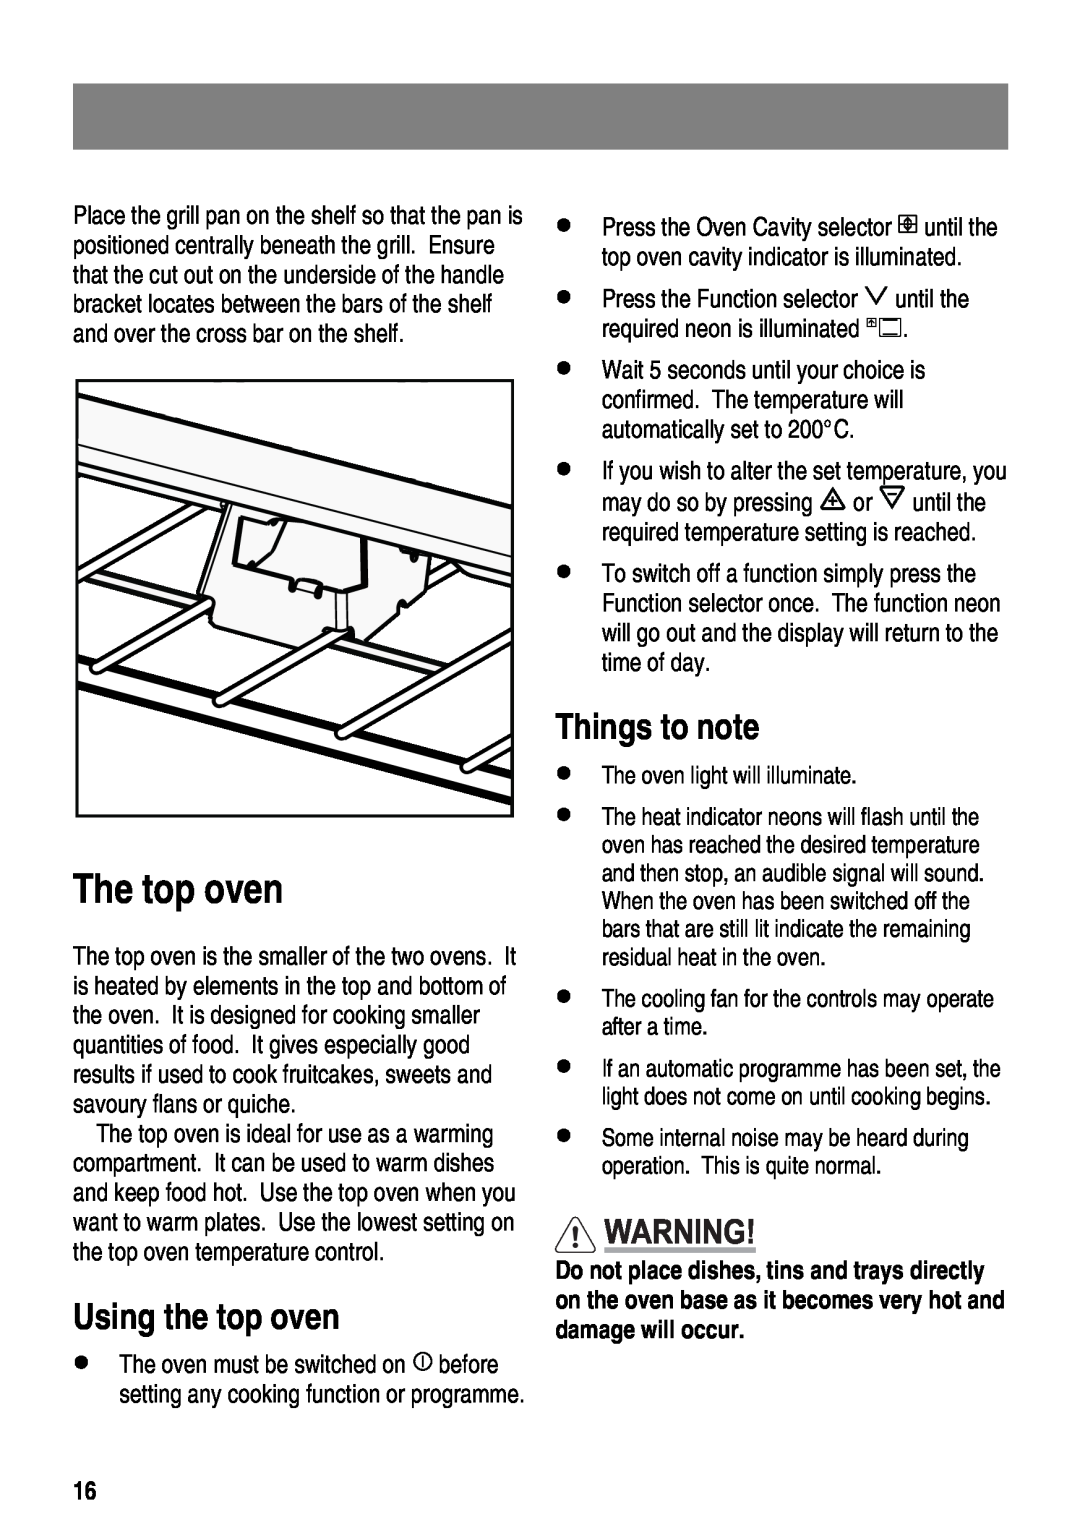 Zanussi ZKT6050 user manual The top oven, Using the top oven, Things to note 